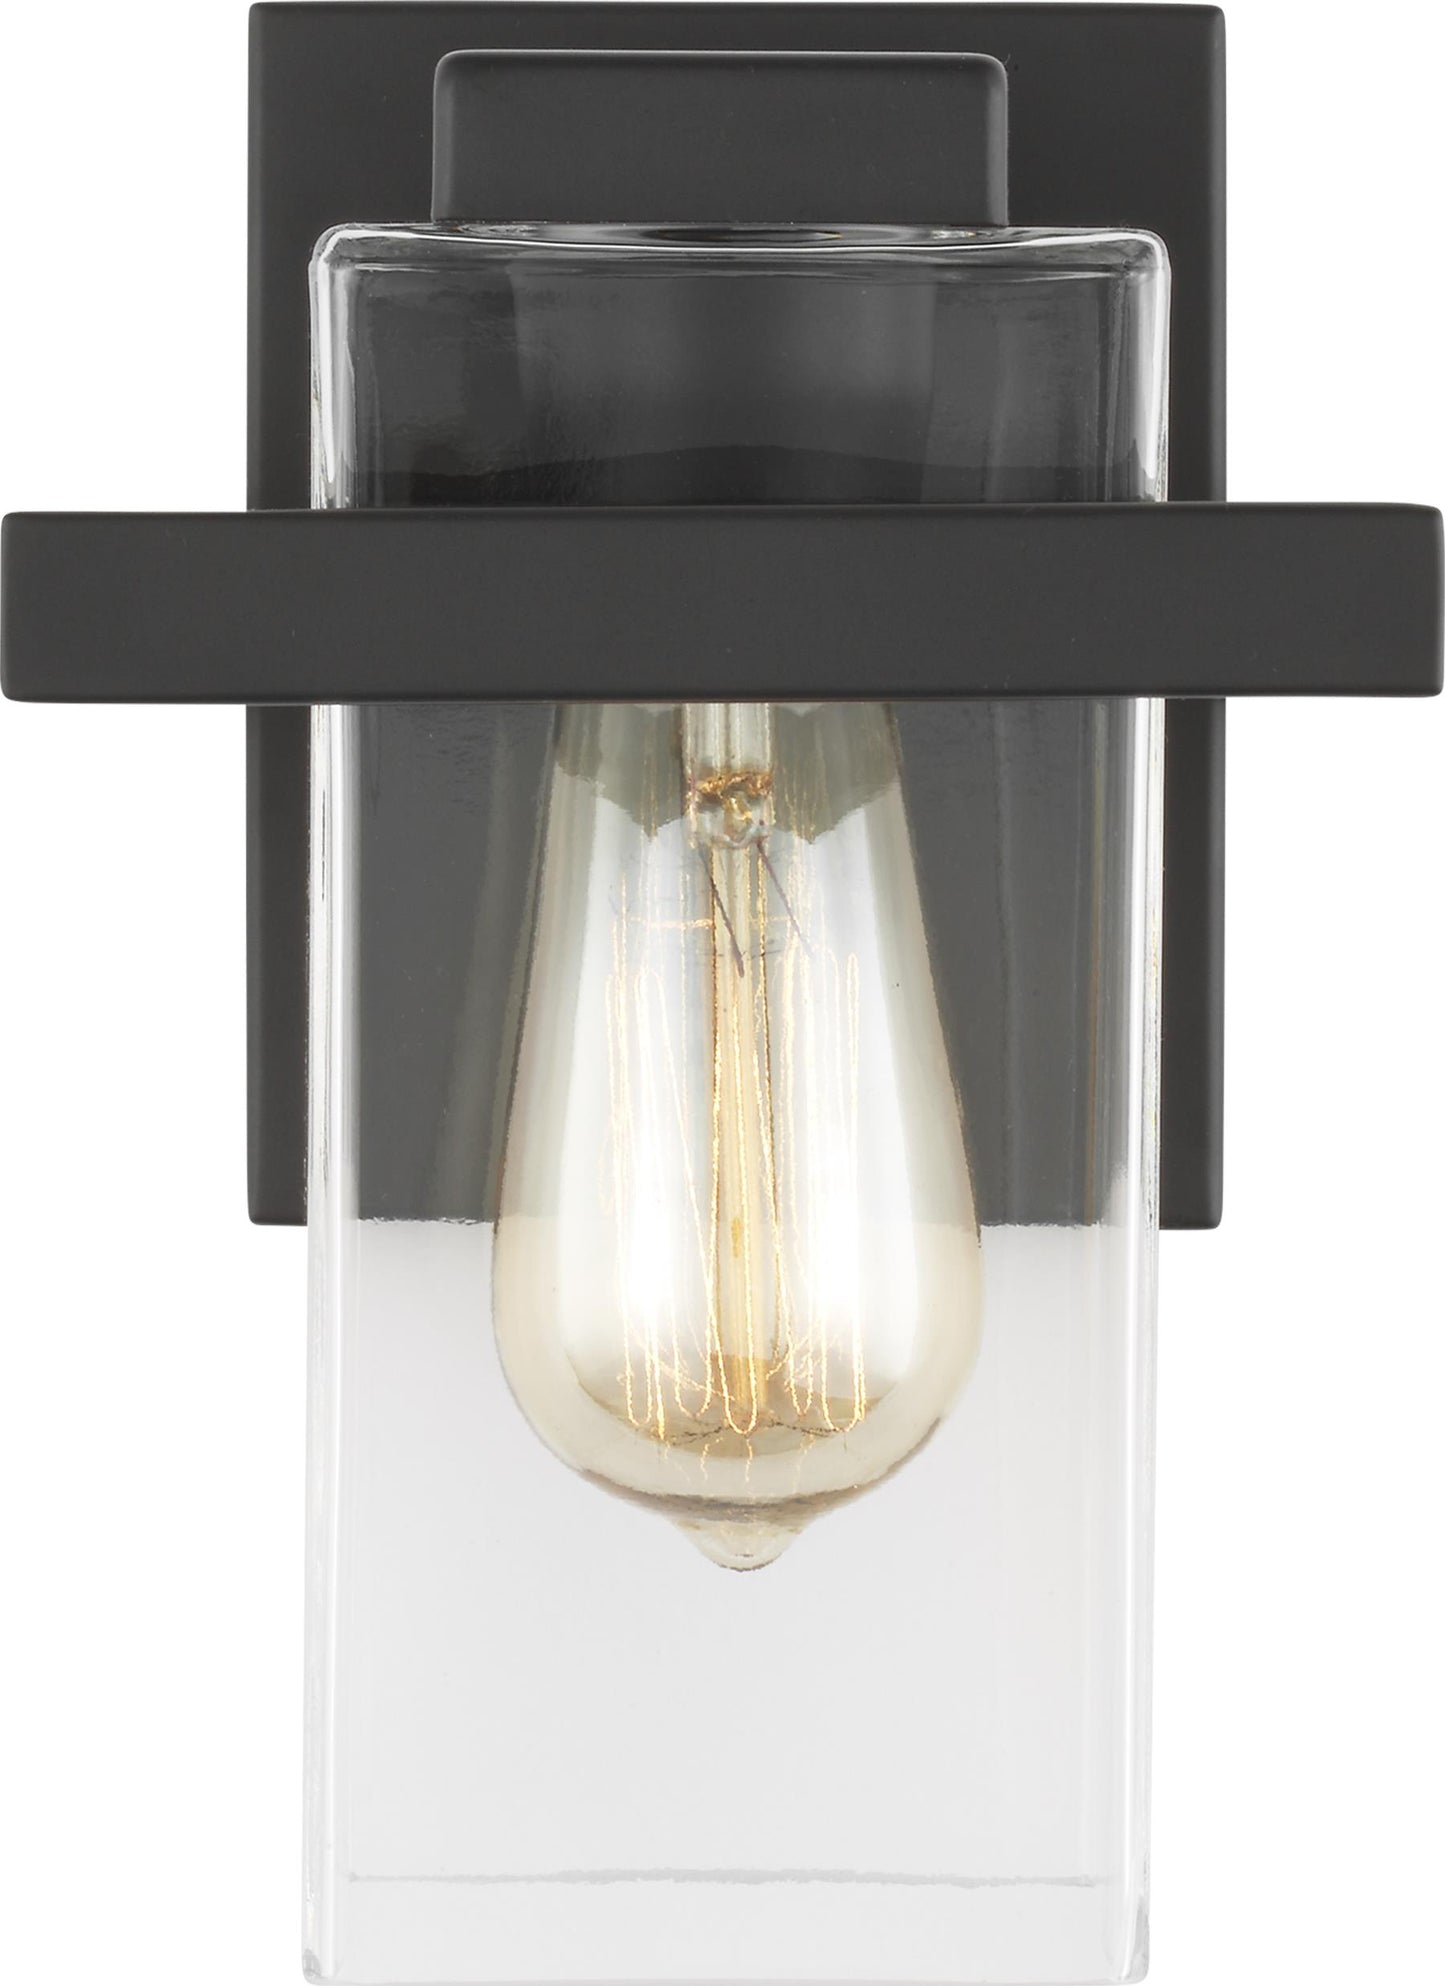 Mitte transitional 1-light indoor dimmable bath vanity wall sconce in midnight black finish with clear glass shade